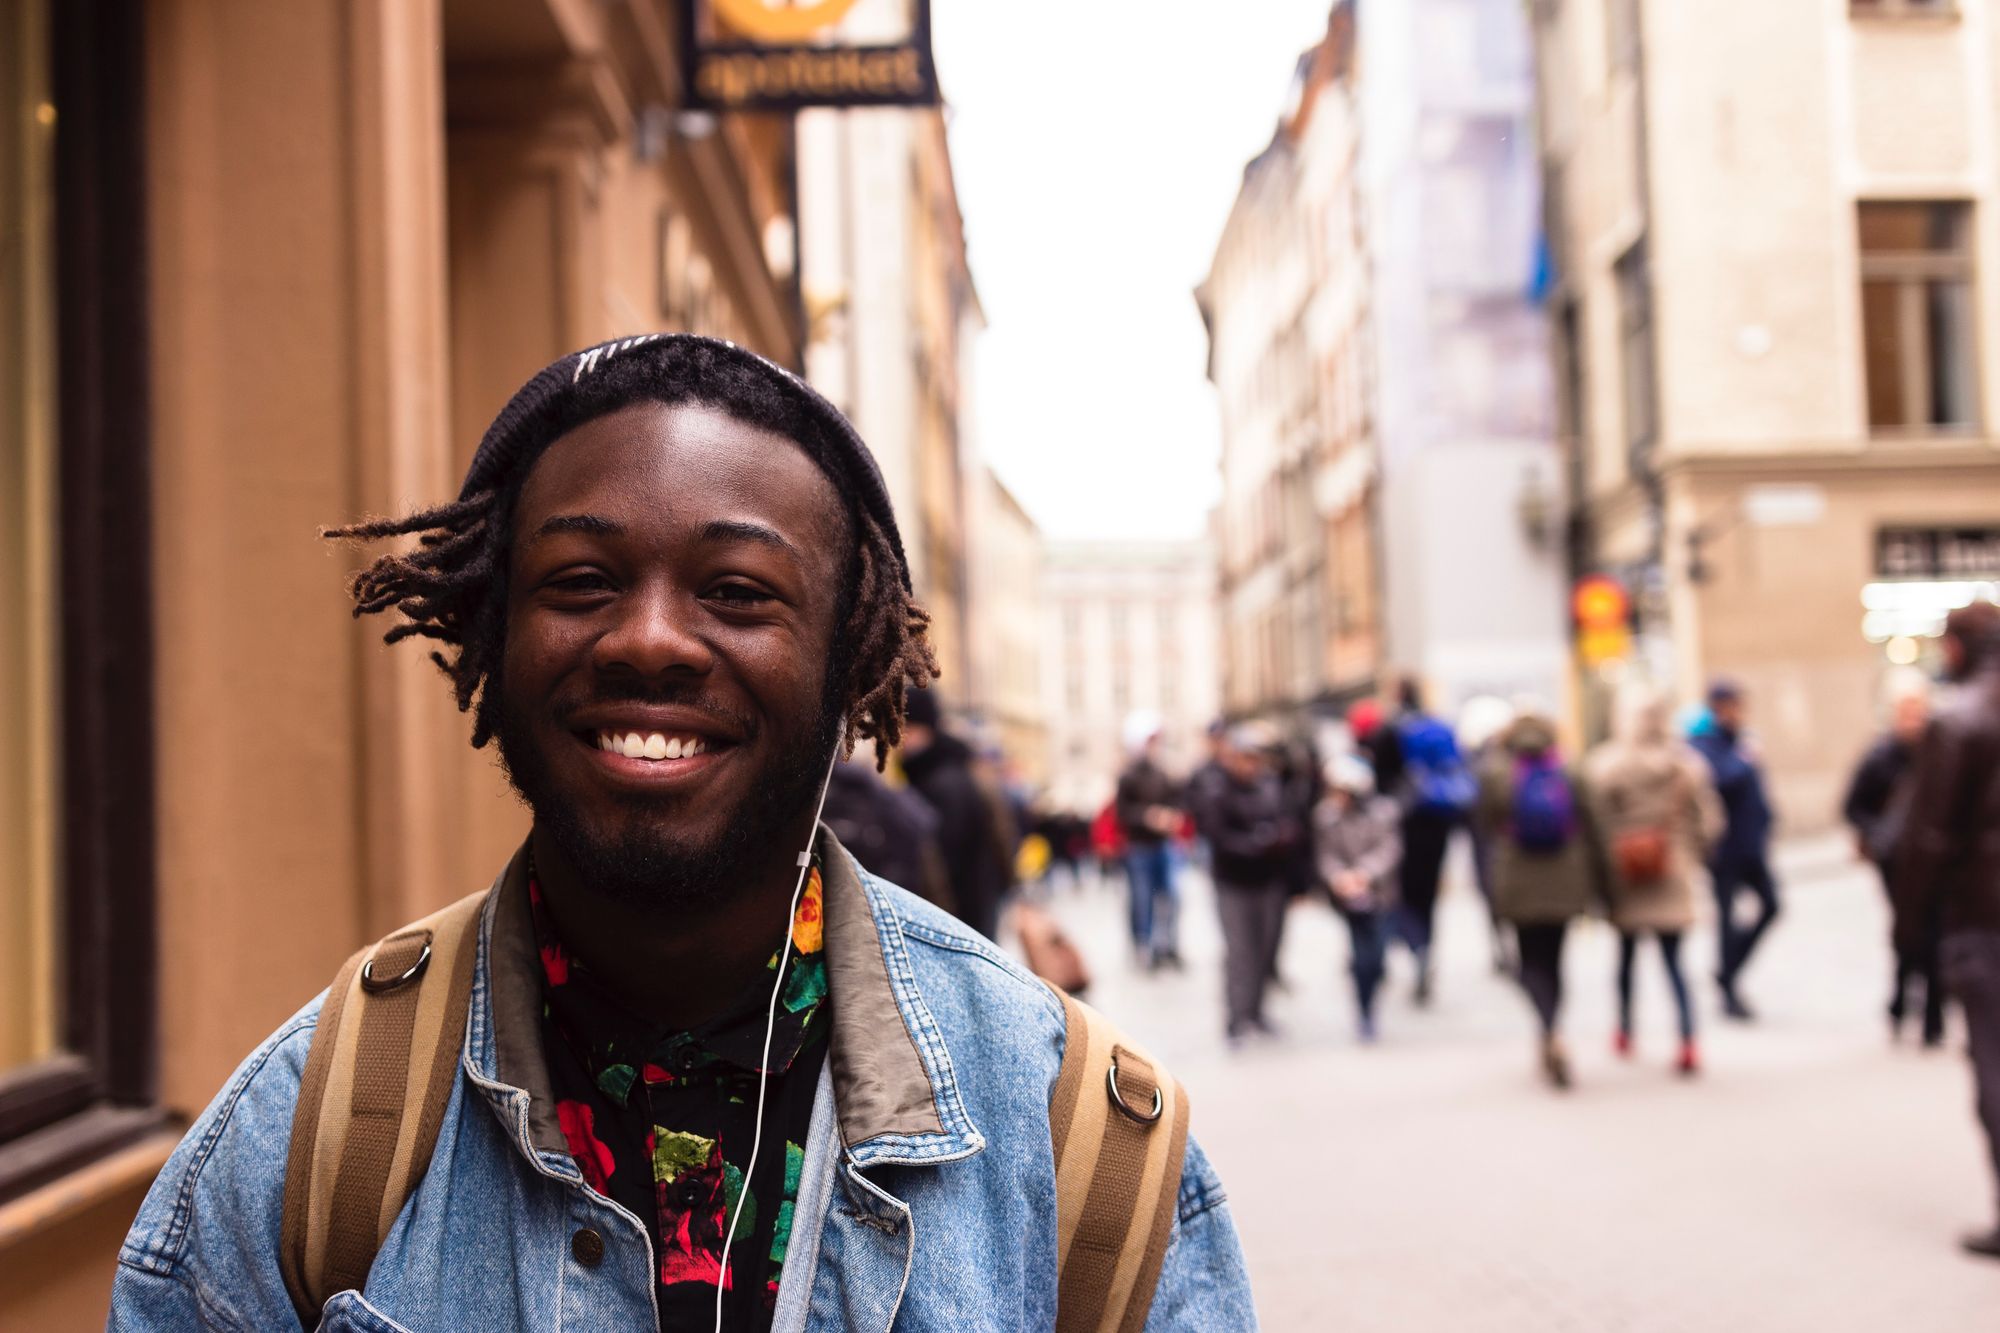 A Black man wearing headphones and smiling while walking in a city.